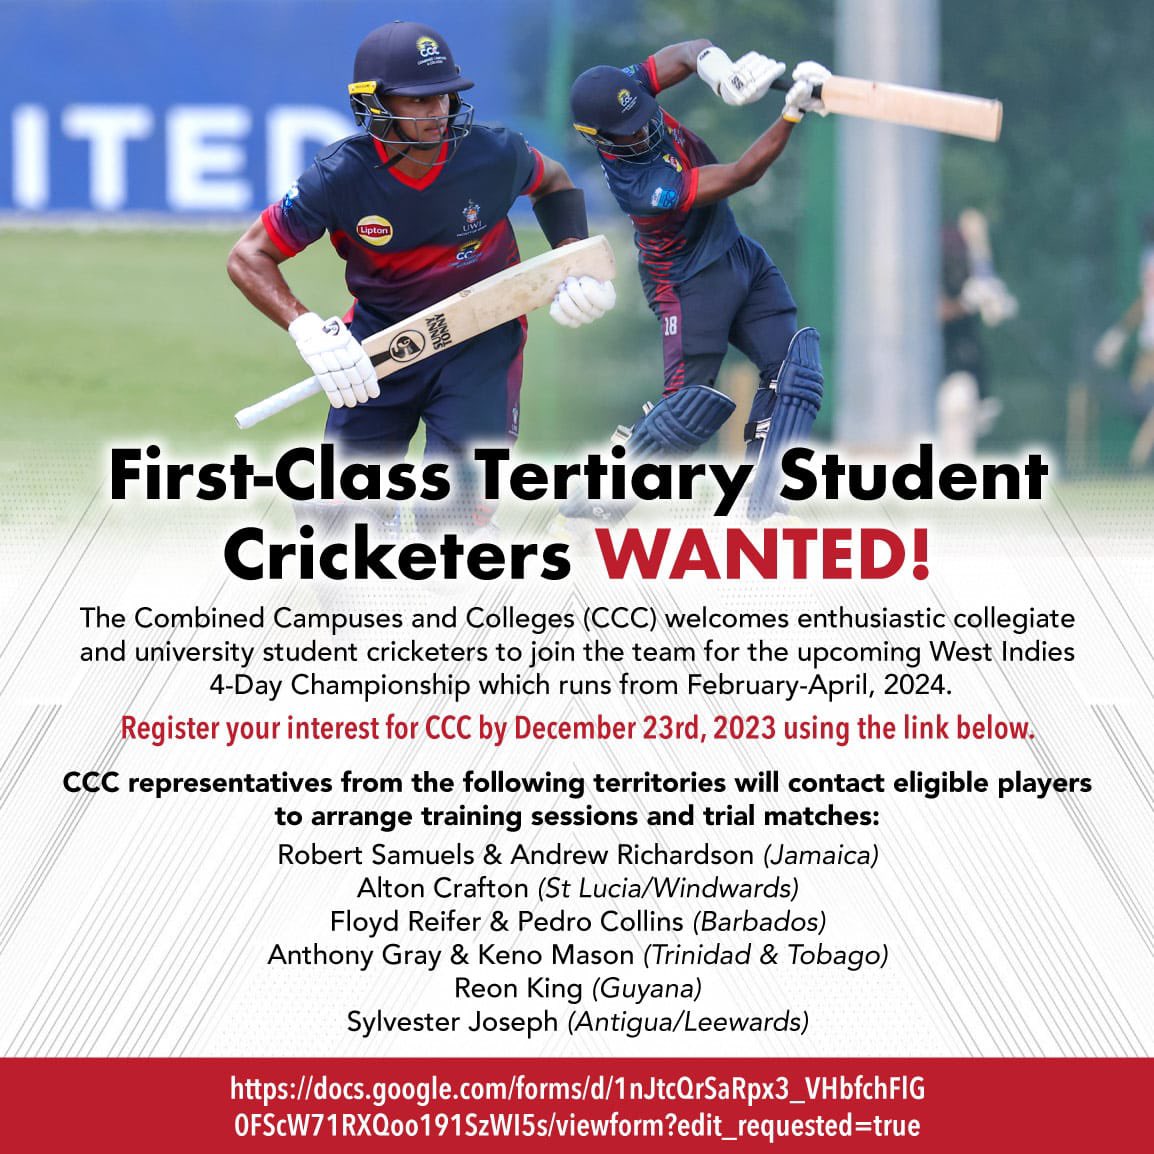 CCC is a UWI Faculty of Sport run franchise. For the next 4yrs, it offers opportunities to tertiary level student cricketers to play FC & List A cricket. CCC with CWI alignment, can use max of 4 non-students to bolster its team. DG Chair Selectors & F Reifer Head Coach. FYI below